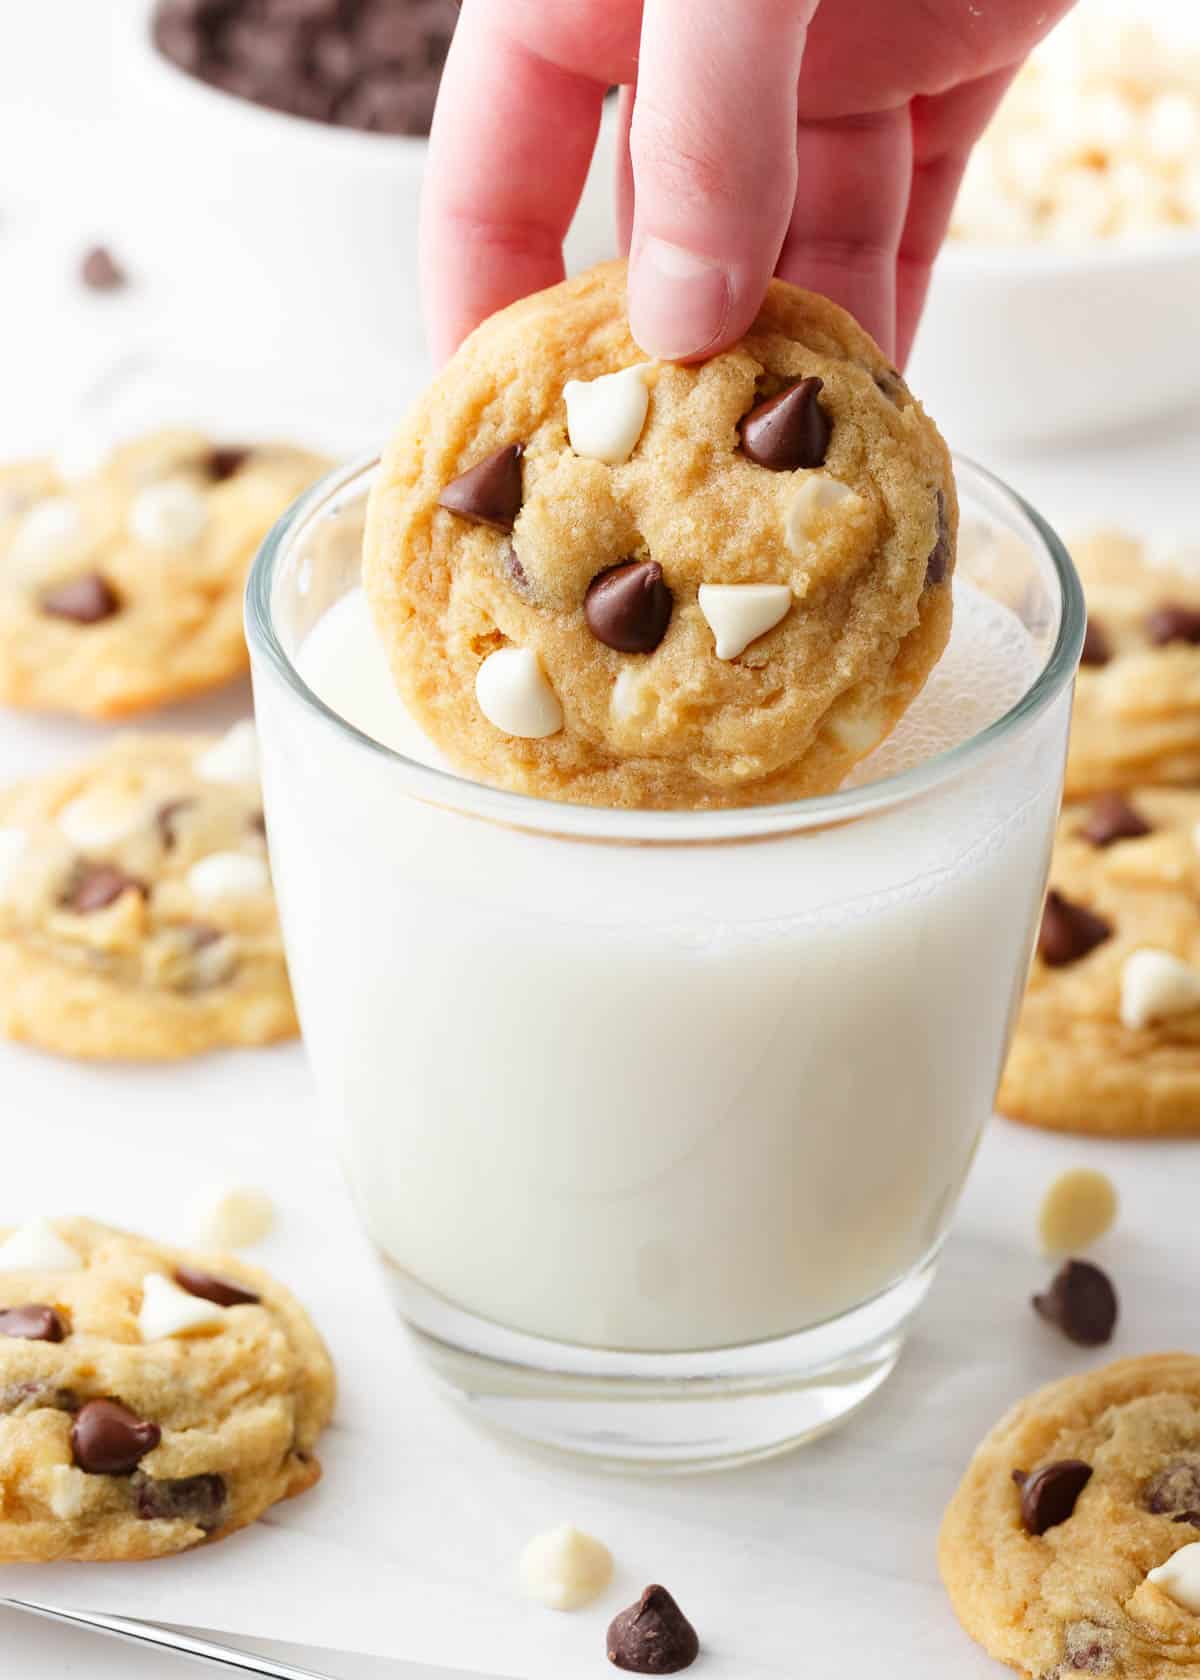 A chocolate chip pudding cookie being dunked into a glass of milk.